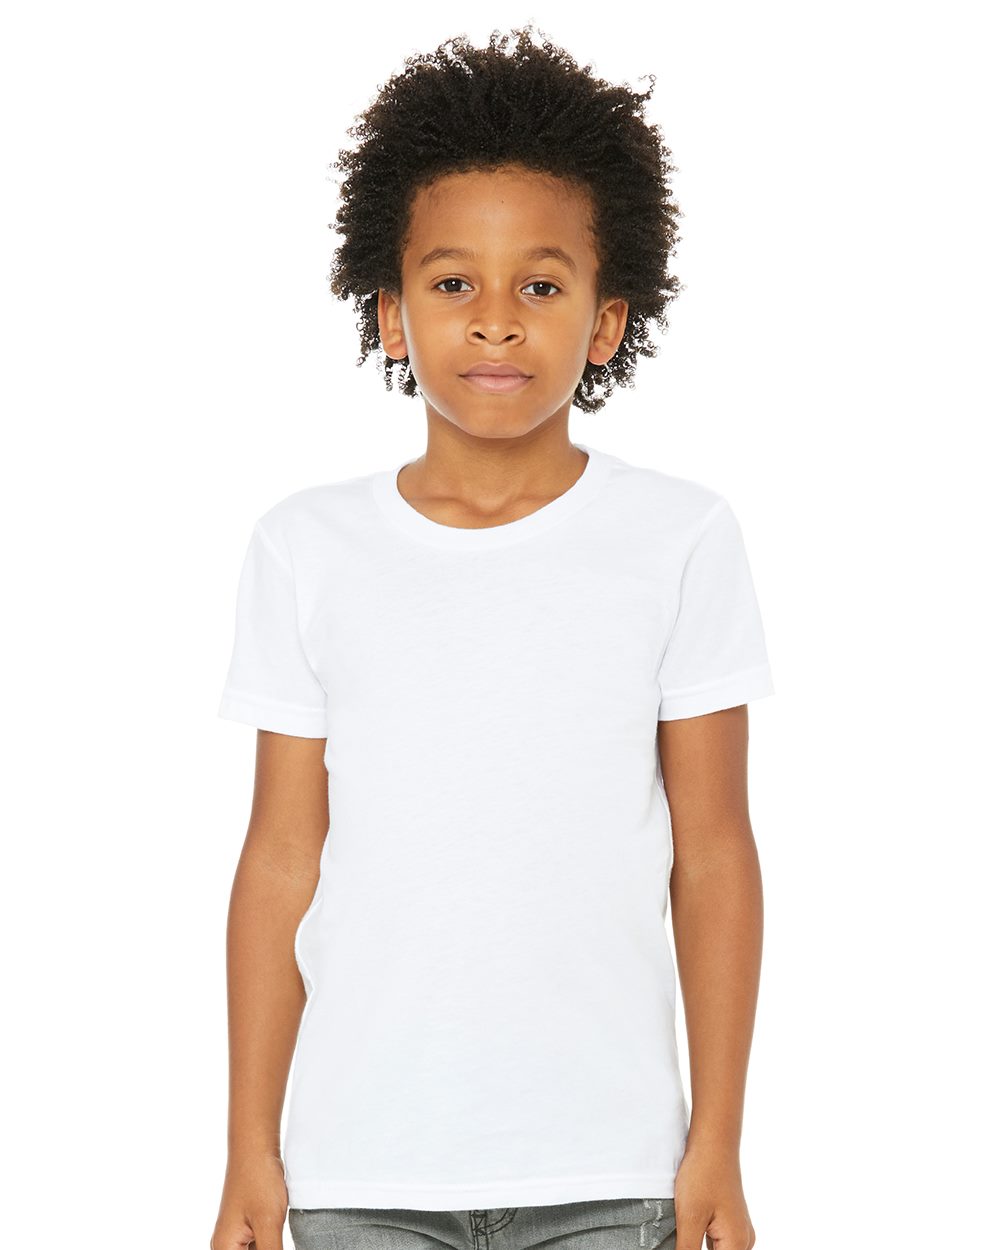 Bella+Canvas Youth Unisex Jersey Tee